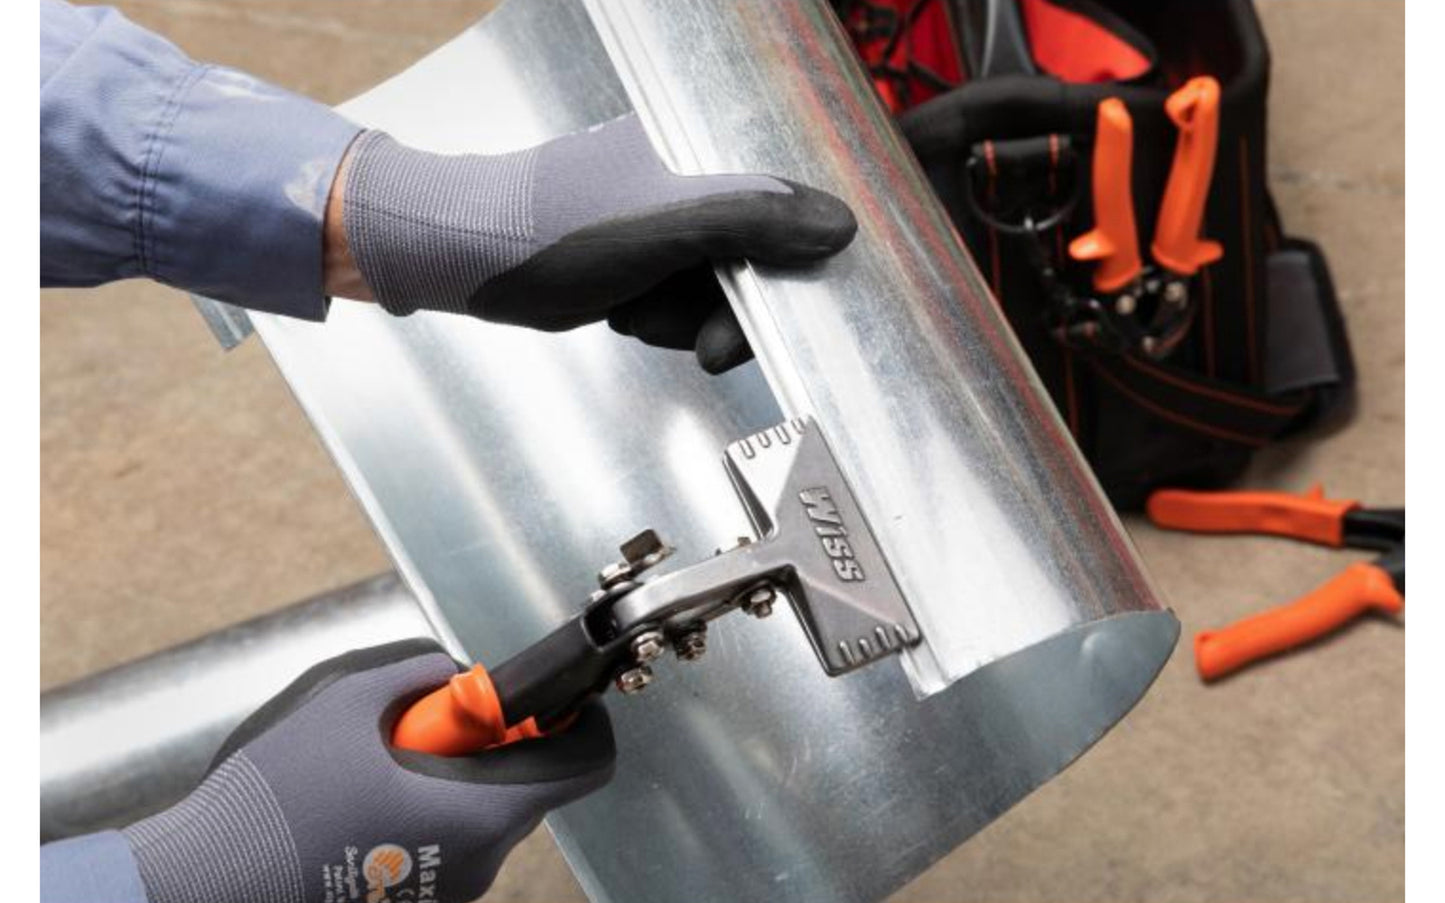 Wiss 3"  Offset Handle Hand Seamer is a powerful tool for bending or flattening sheet metal by hand. It utilizes an optimal handle span to deliver maximum power from an ergonomic operating range, and features non-slip cushion grips for superior comfort & control. 037103308559. Model WS4N.